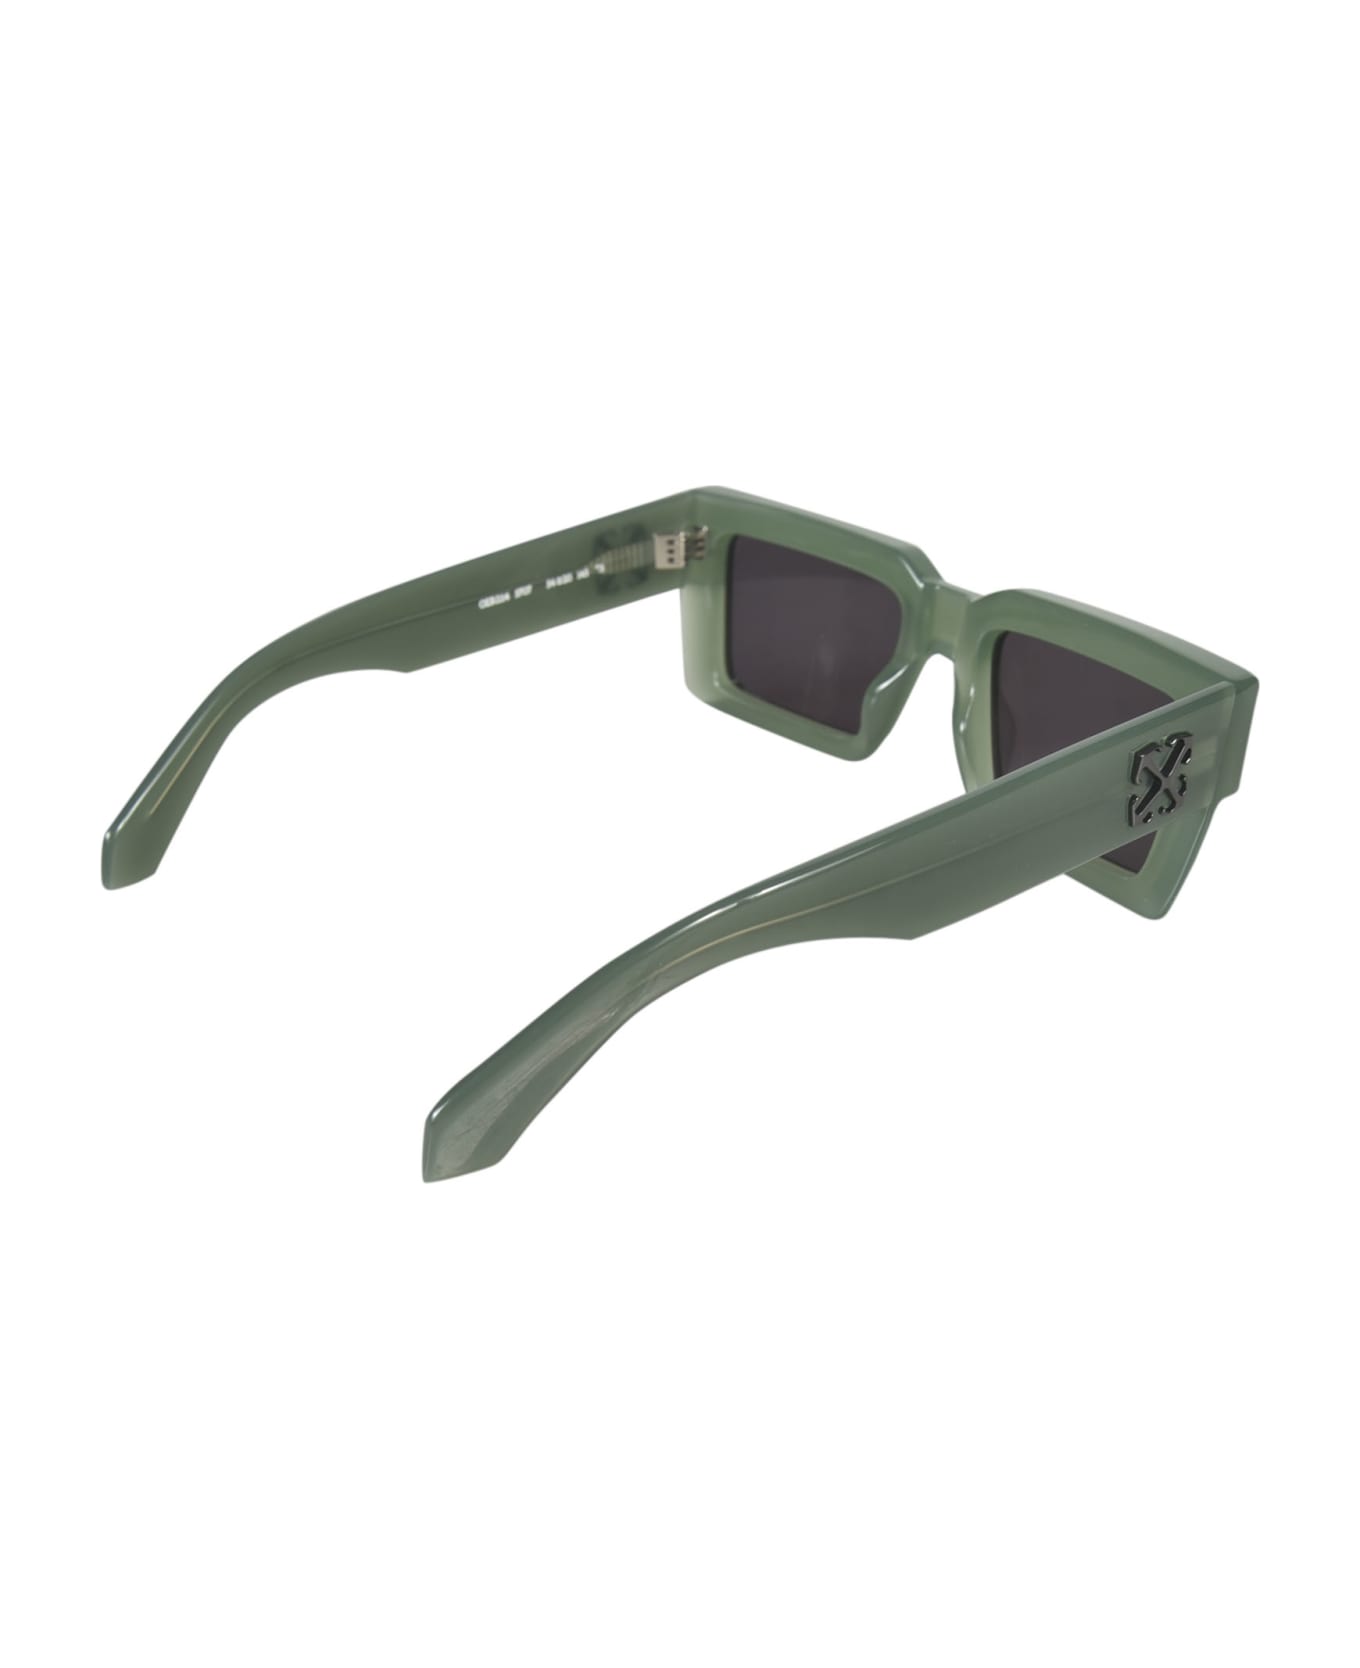 Off-White Moberly Sunglasses - Olive Green